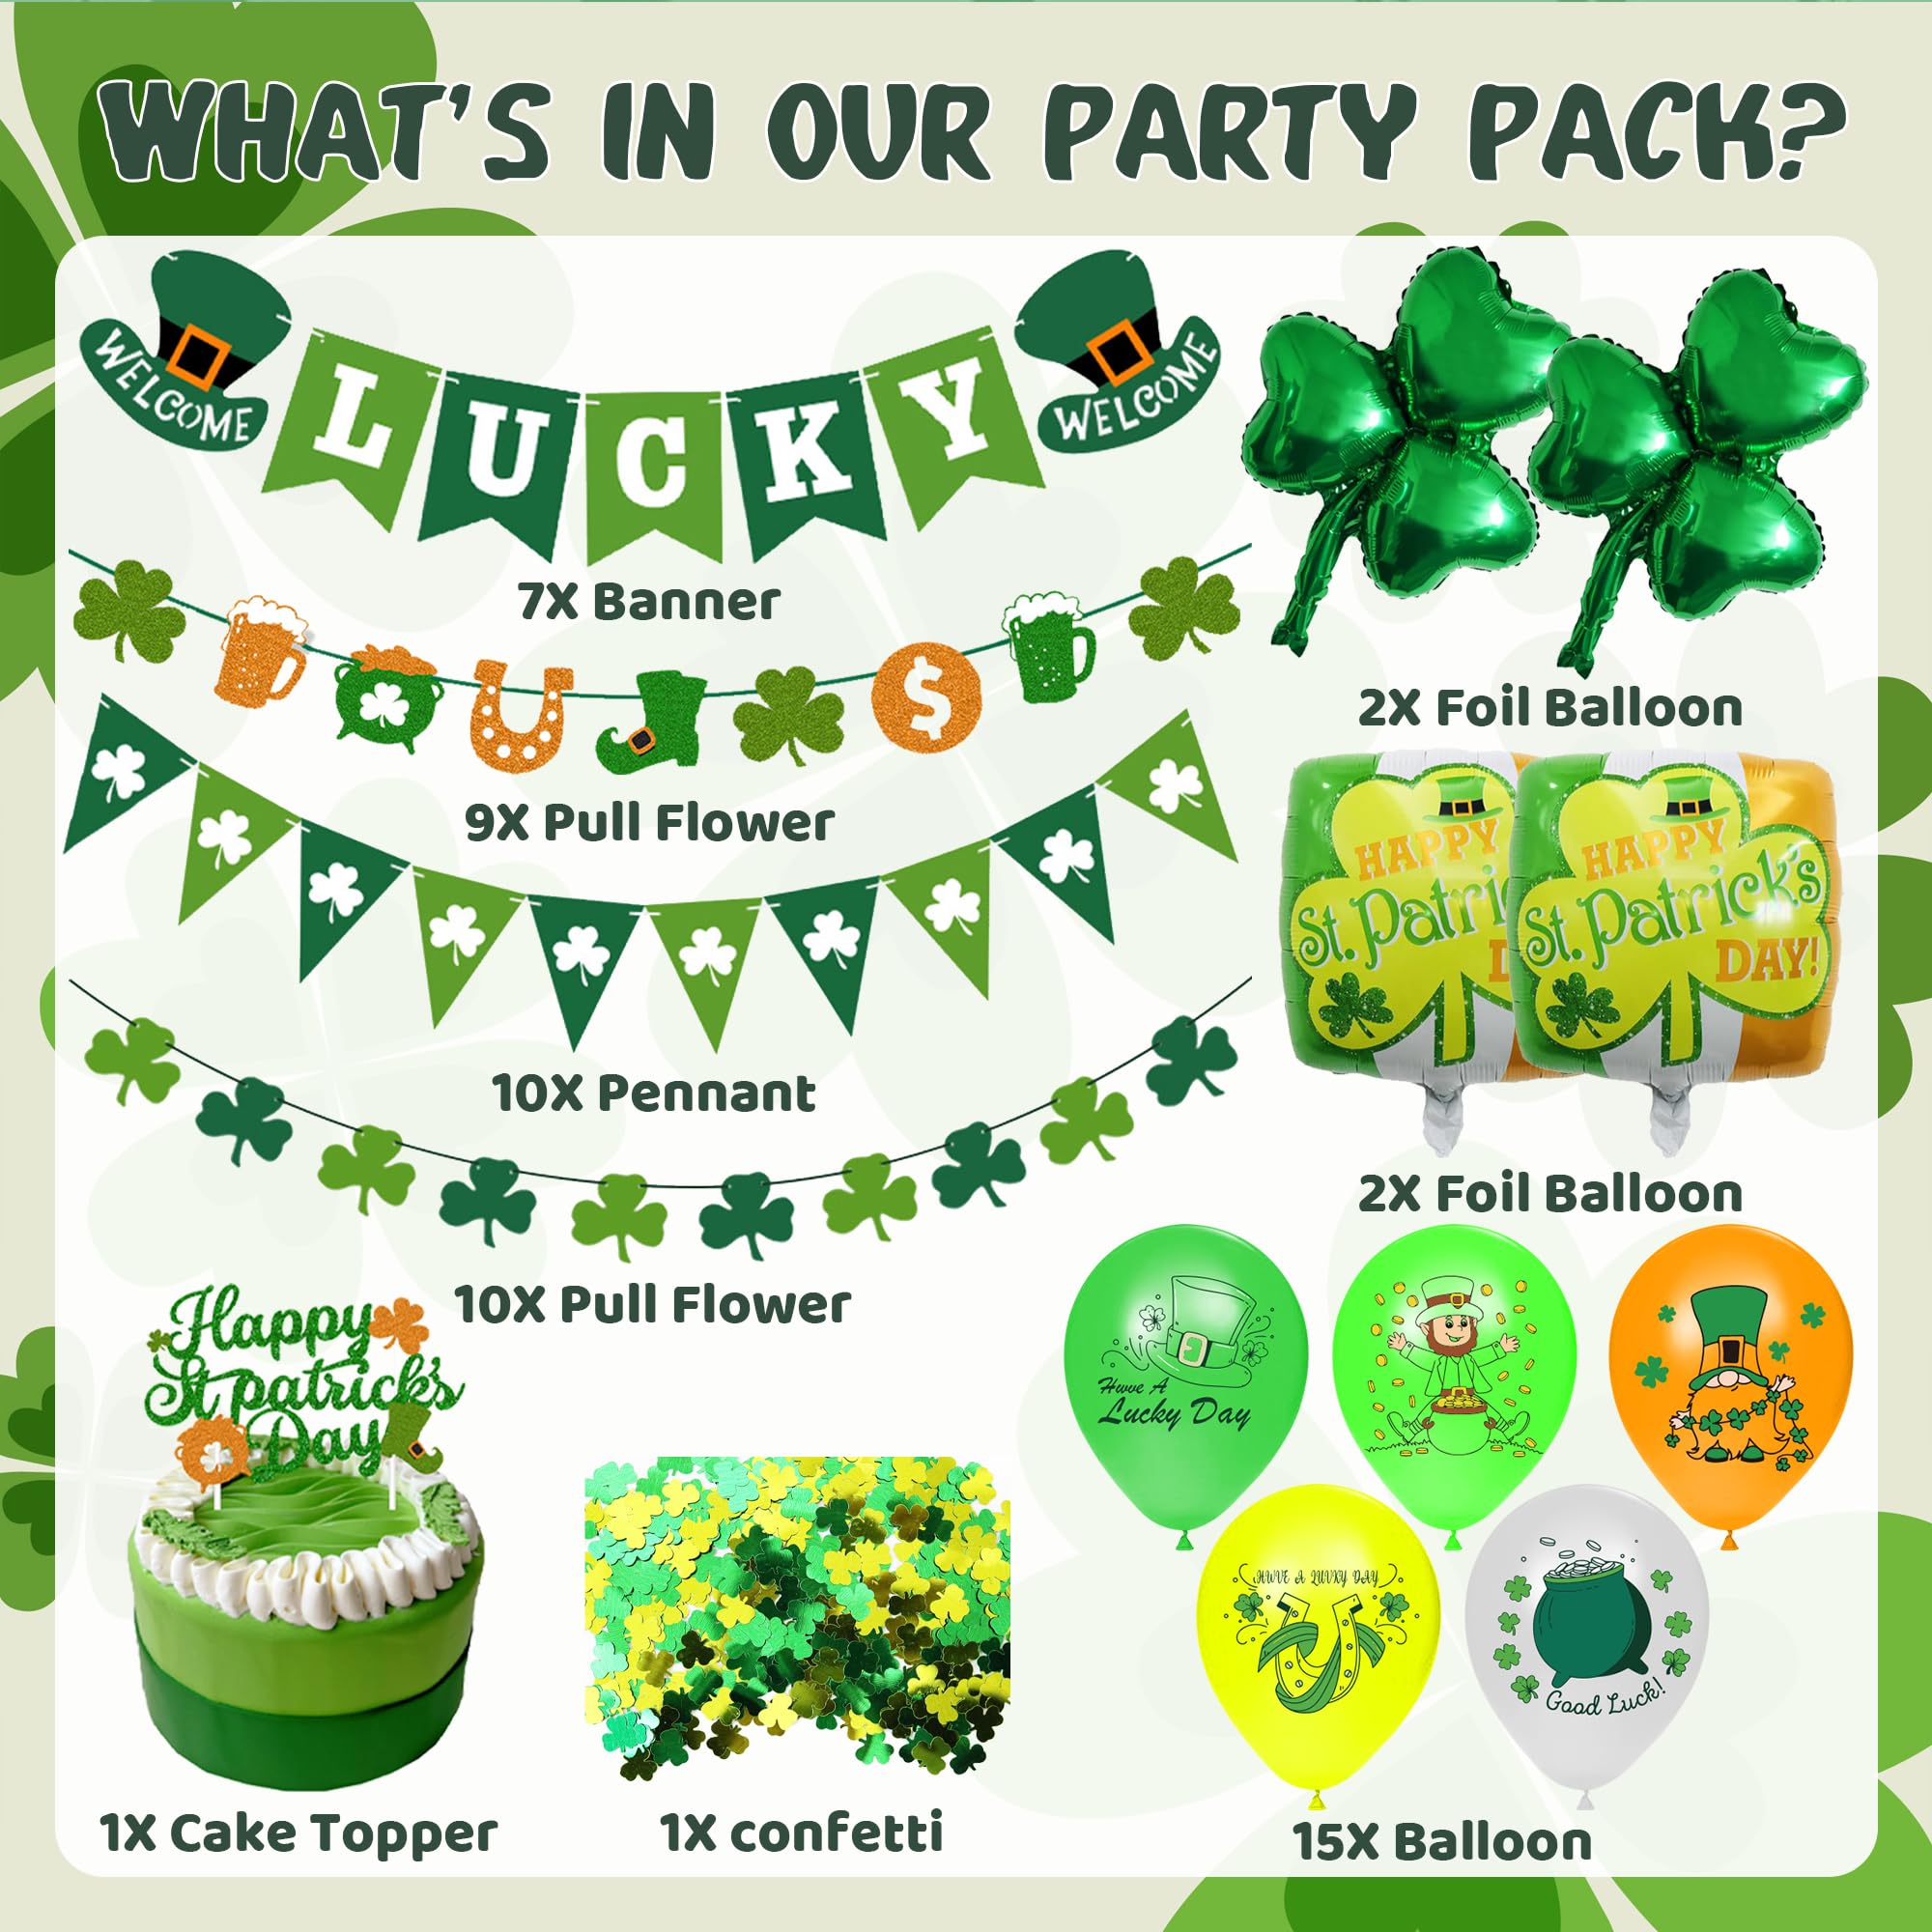 St. Patrick's Day Balloons Decorations - Green Shamrock Foil and Banner Latex Balloons -67 Pieces Irish St. Patrick's Day Celebration Party Supplies